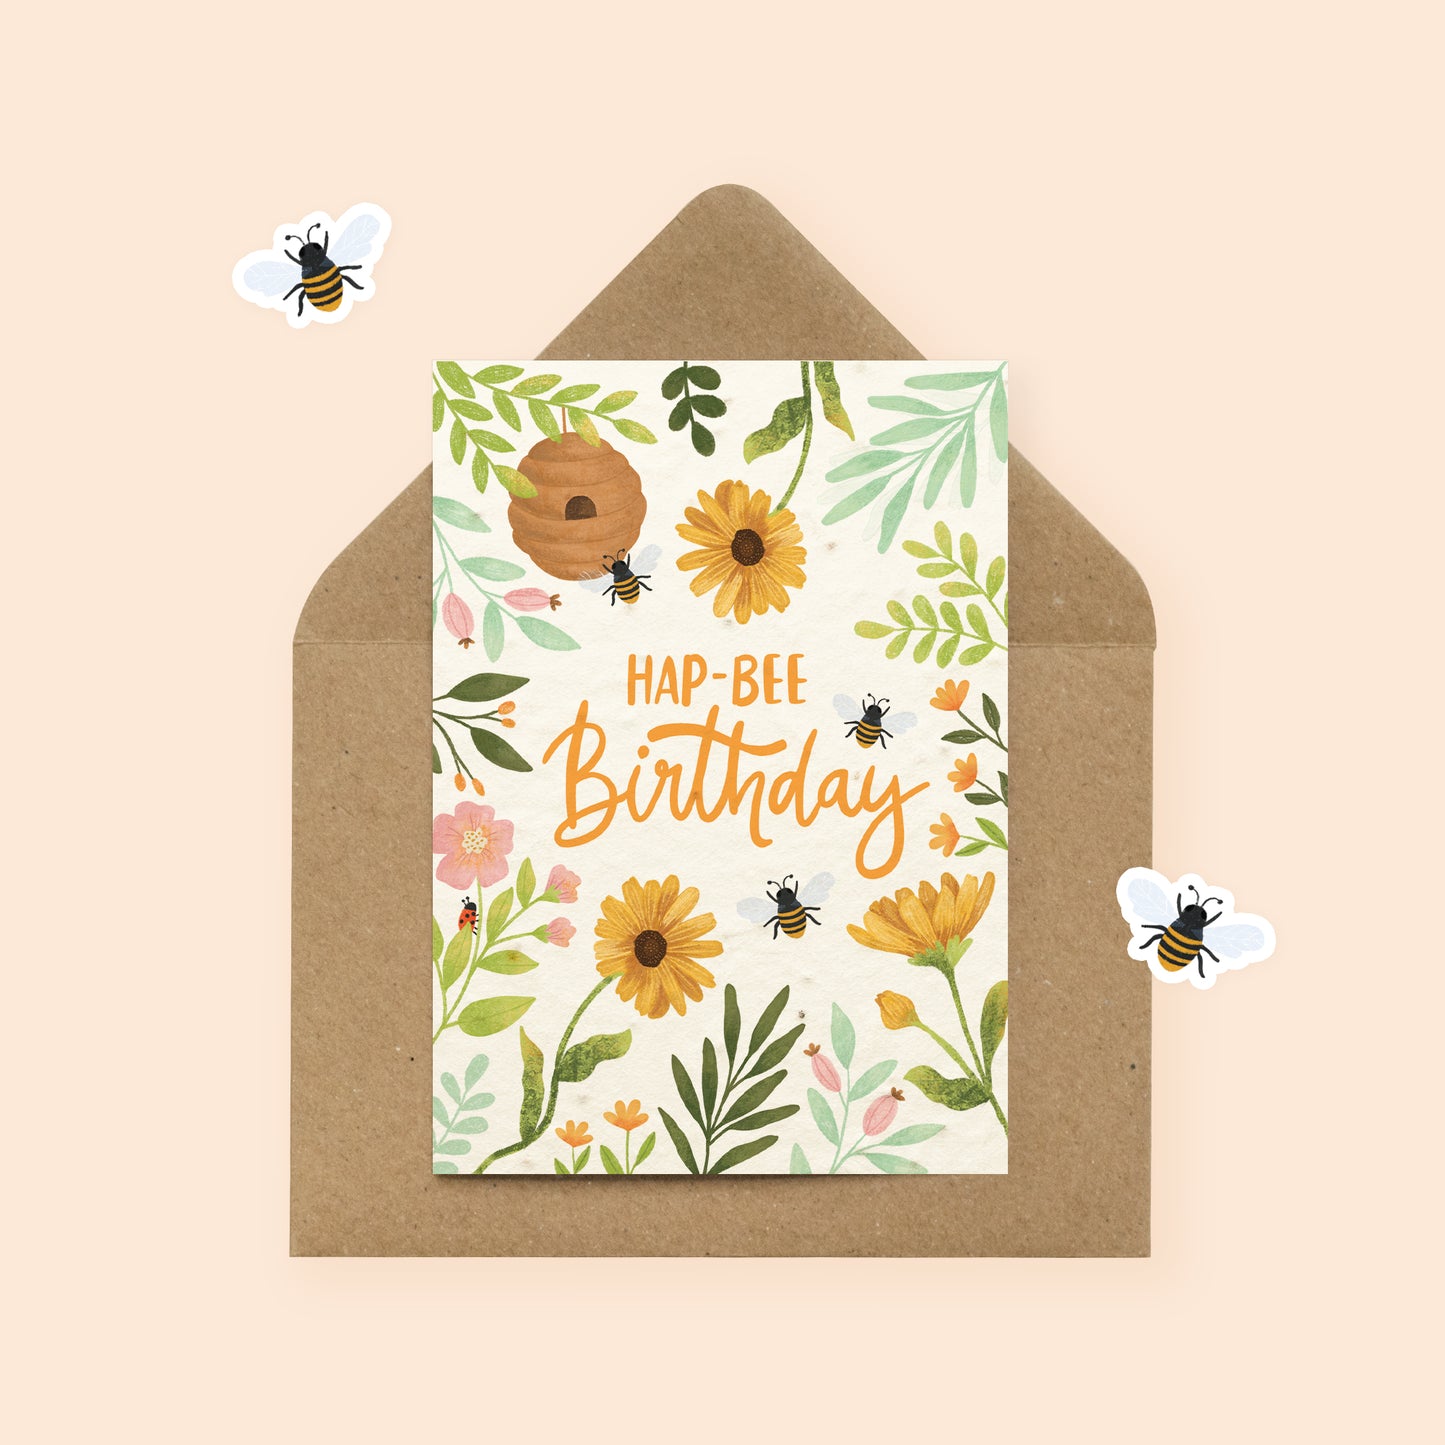 Plantable birthday card with Bees, wildflowers and kraft envelope